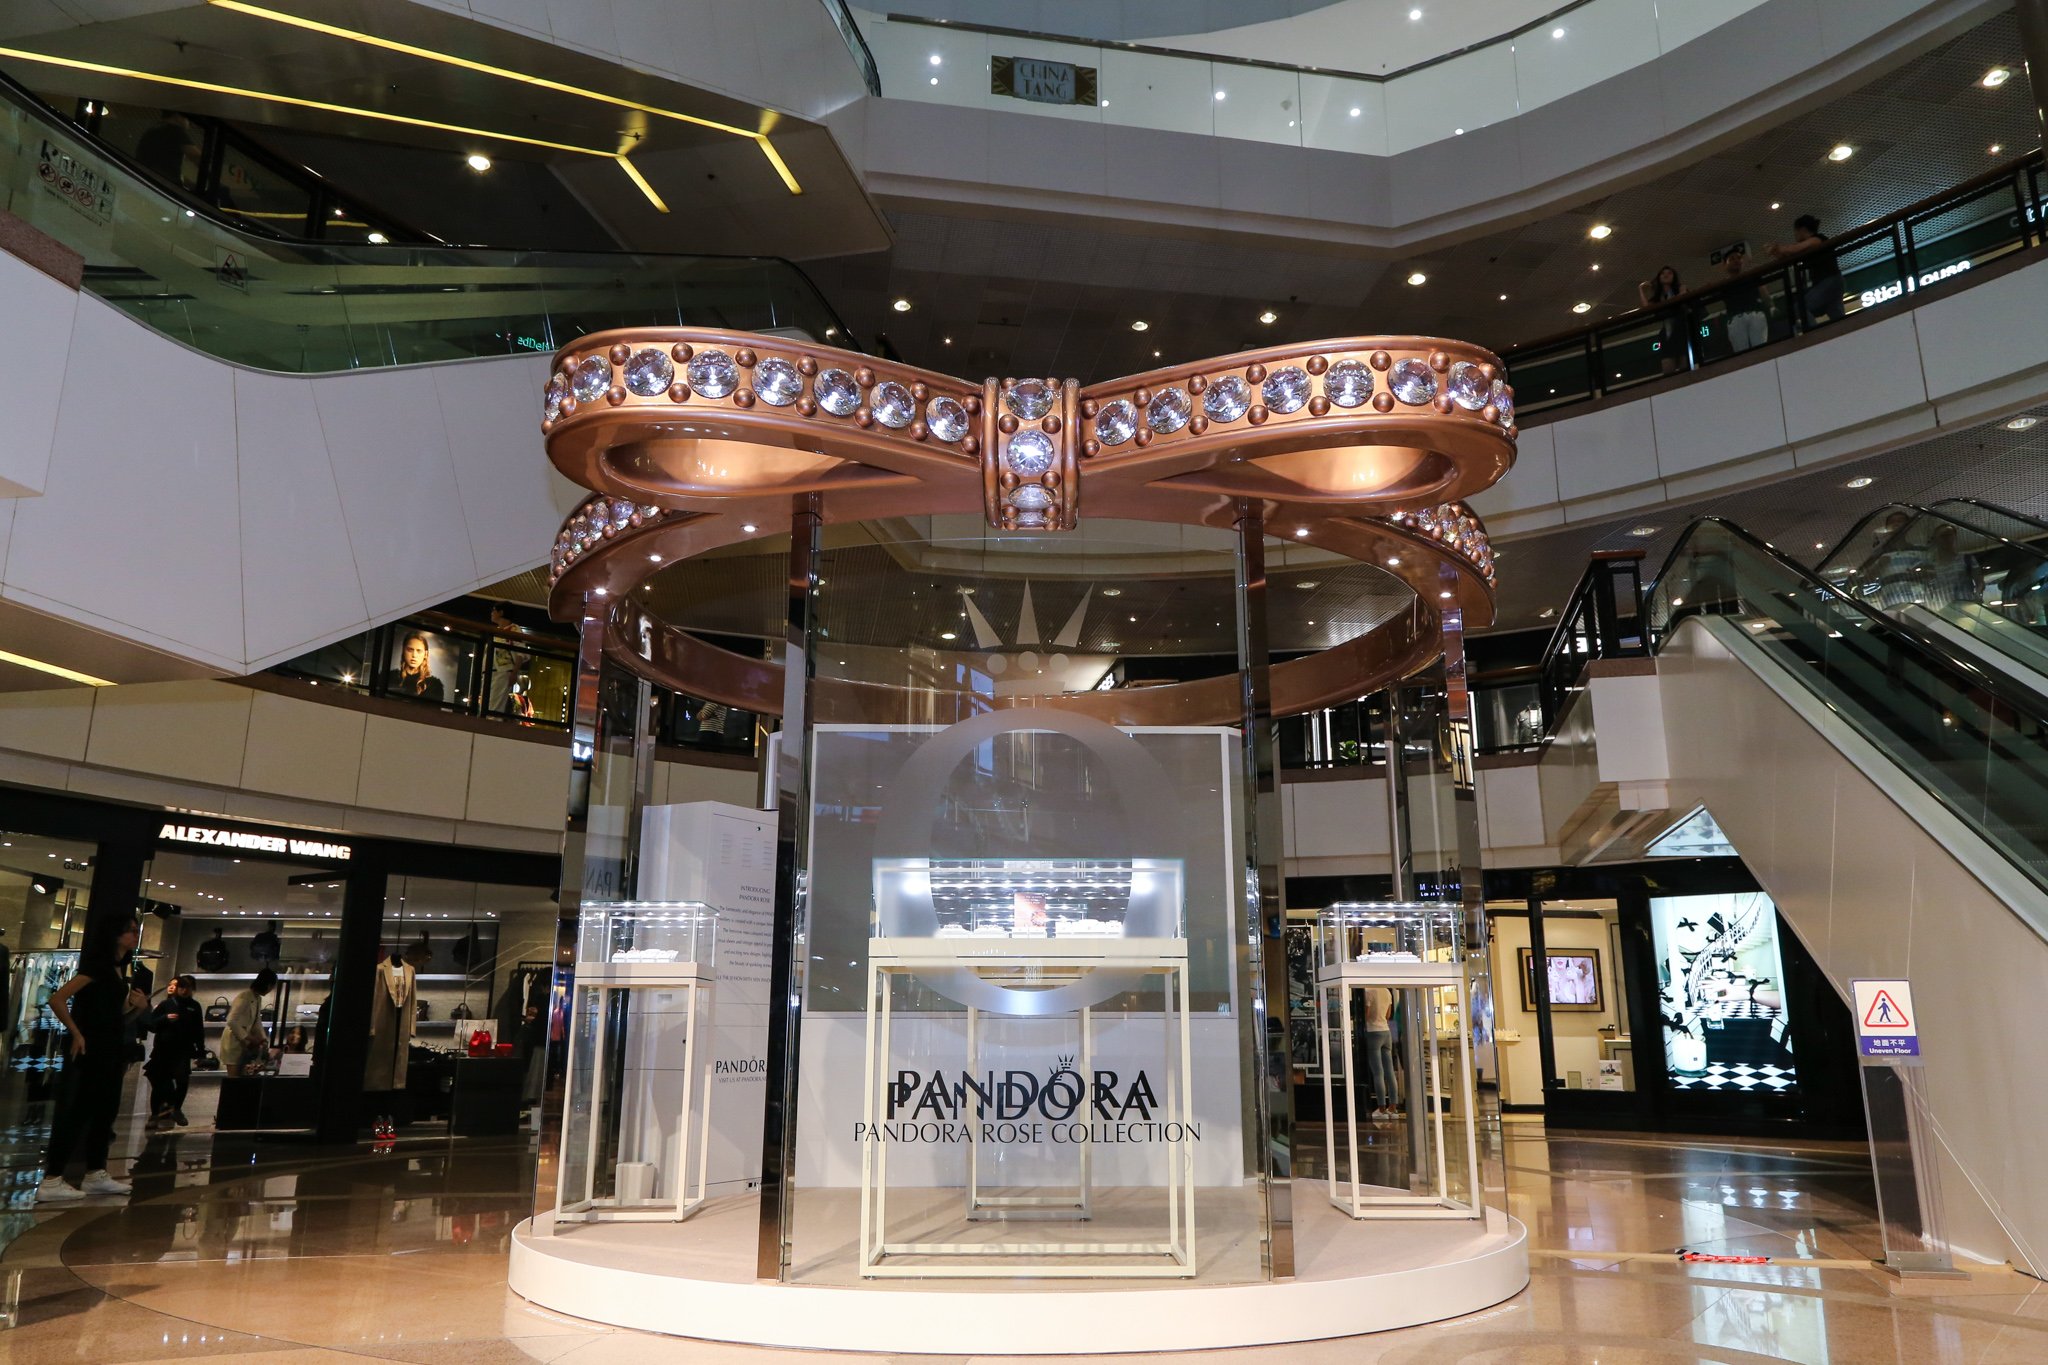 Harbour City on Twitter: "PANDORA launches #pandora ROSE Come and check it at their pop-up roadshow at Atrium I. #harbourcity https://t.co/6zkVYFNyRQ" / Twitter